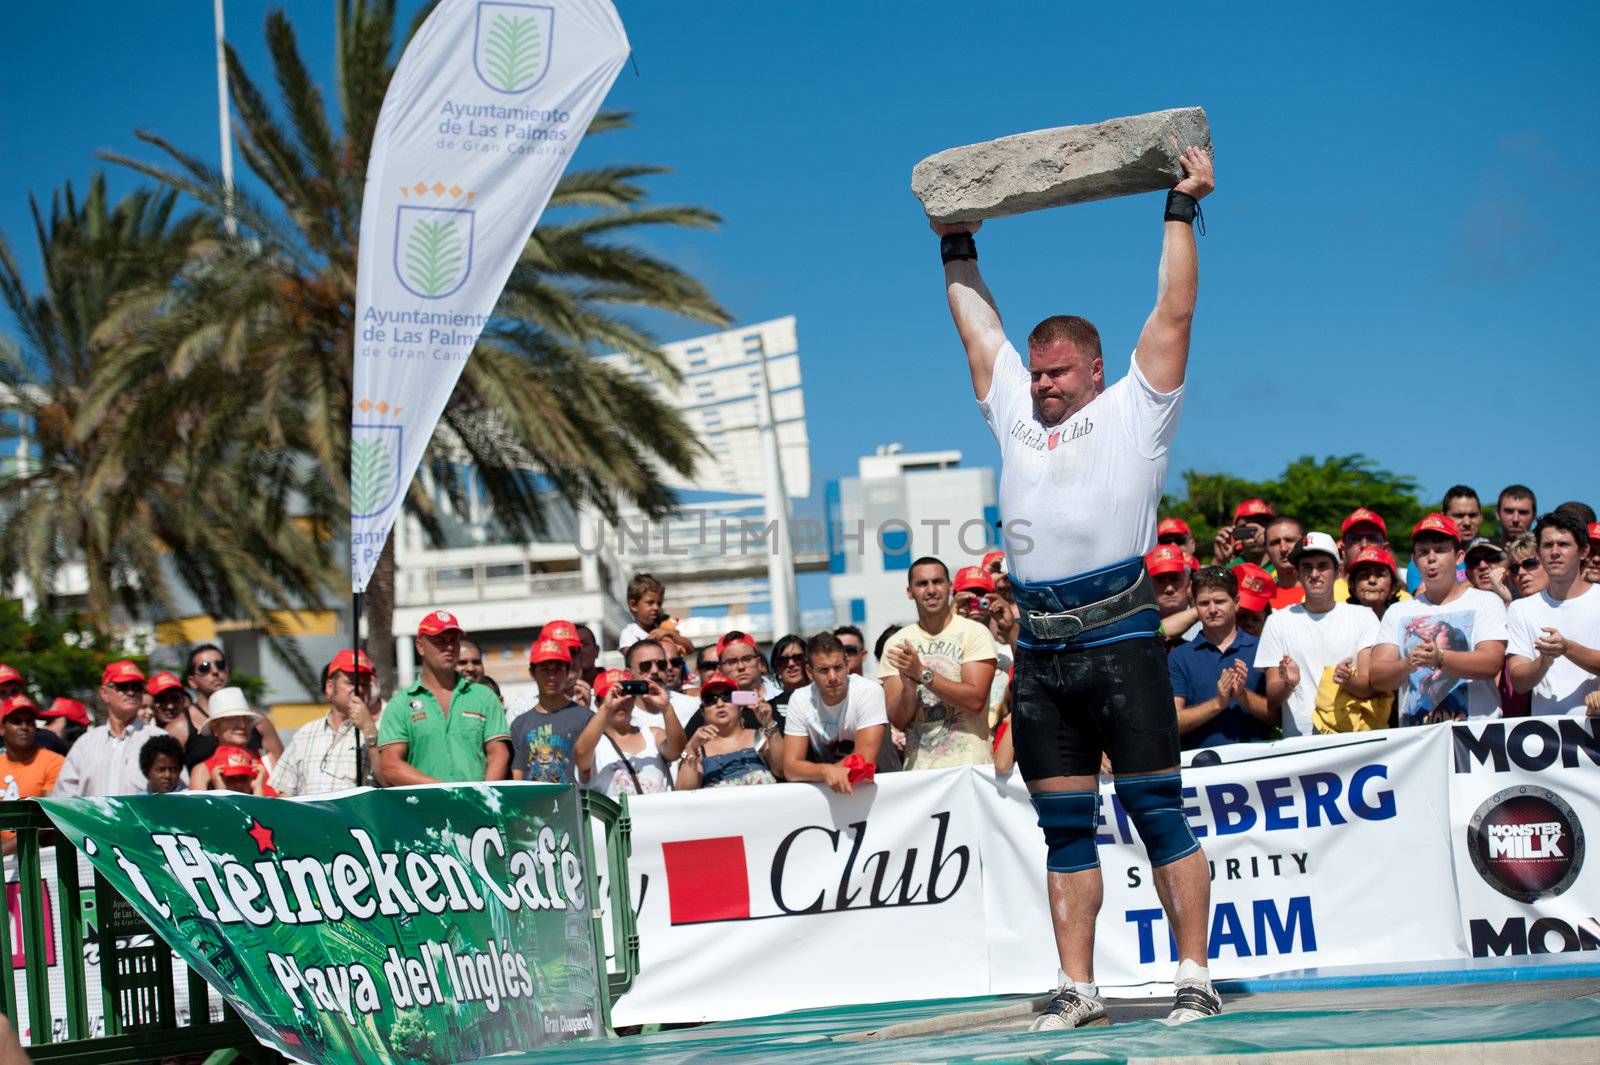 CANARY ISLANDS – SEPTEMBER 03: Lauri Nami from Estonia lifting a heavy stone during Strongman Champions League in Las Palmas September 03, 2011 in Canary Islands, Spain